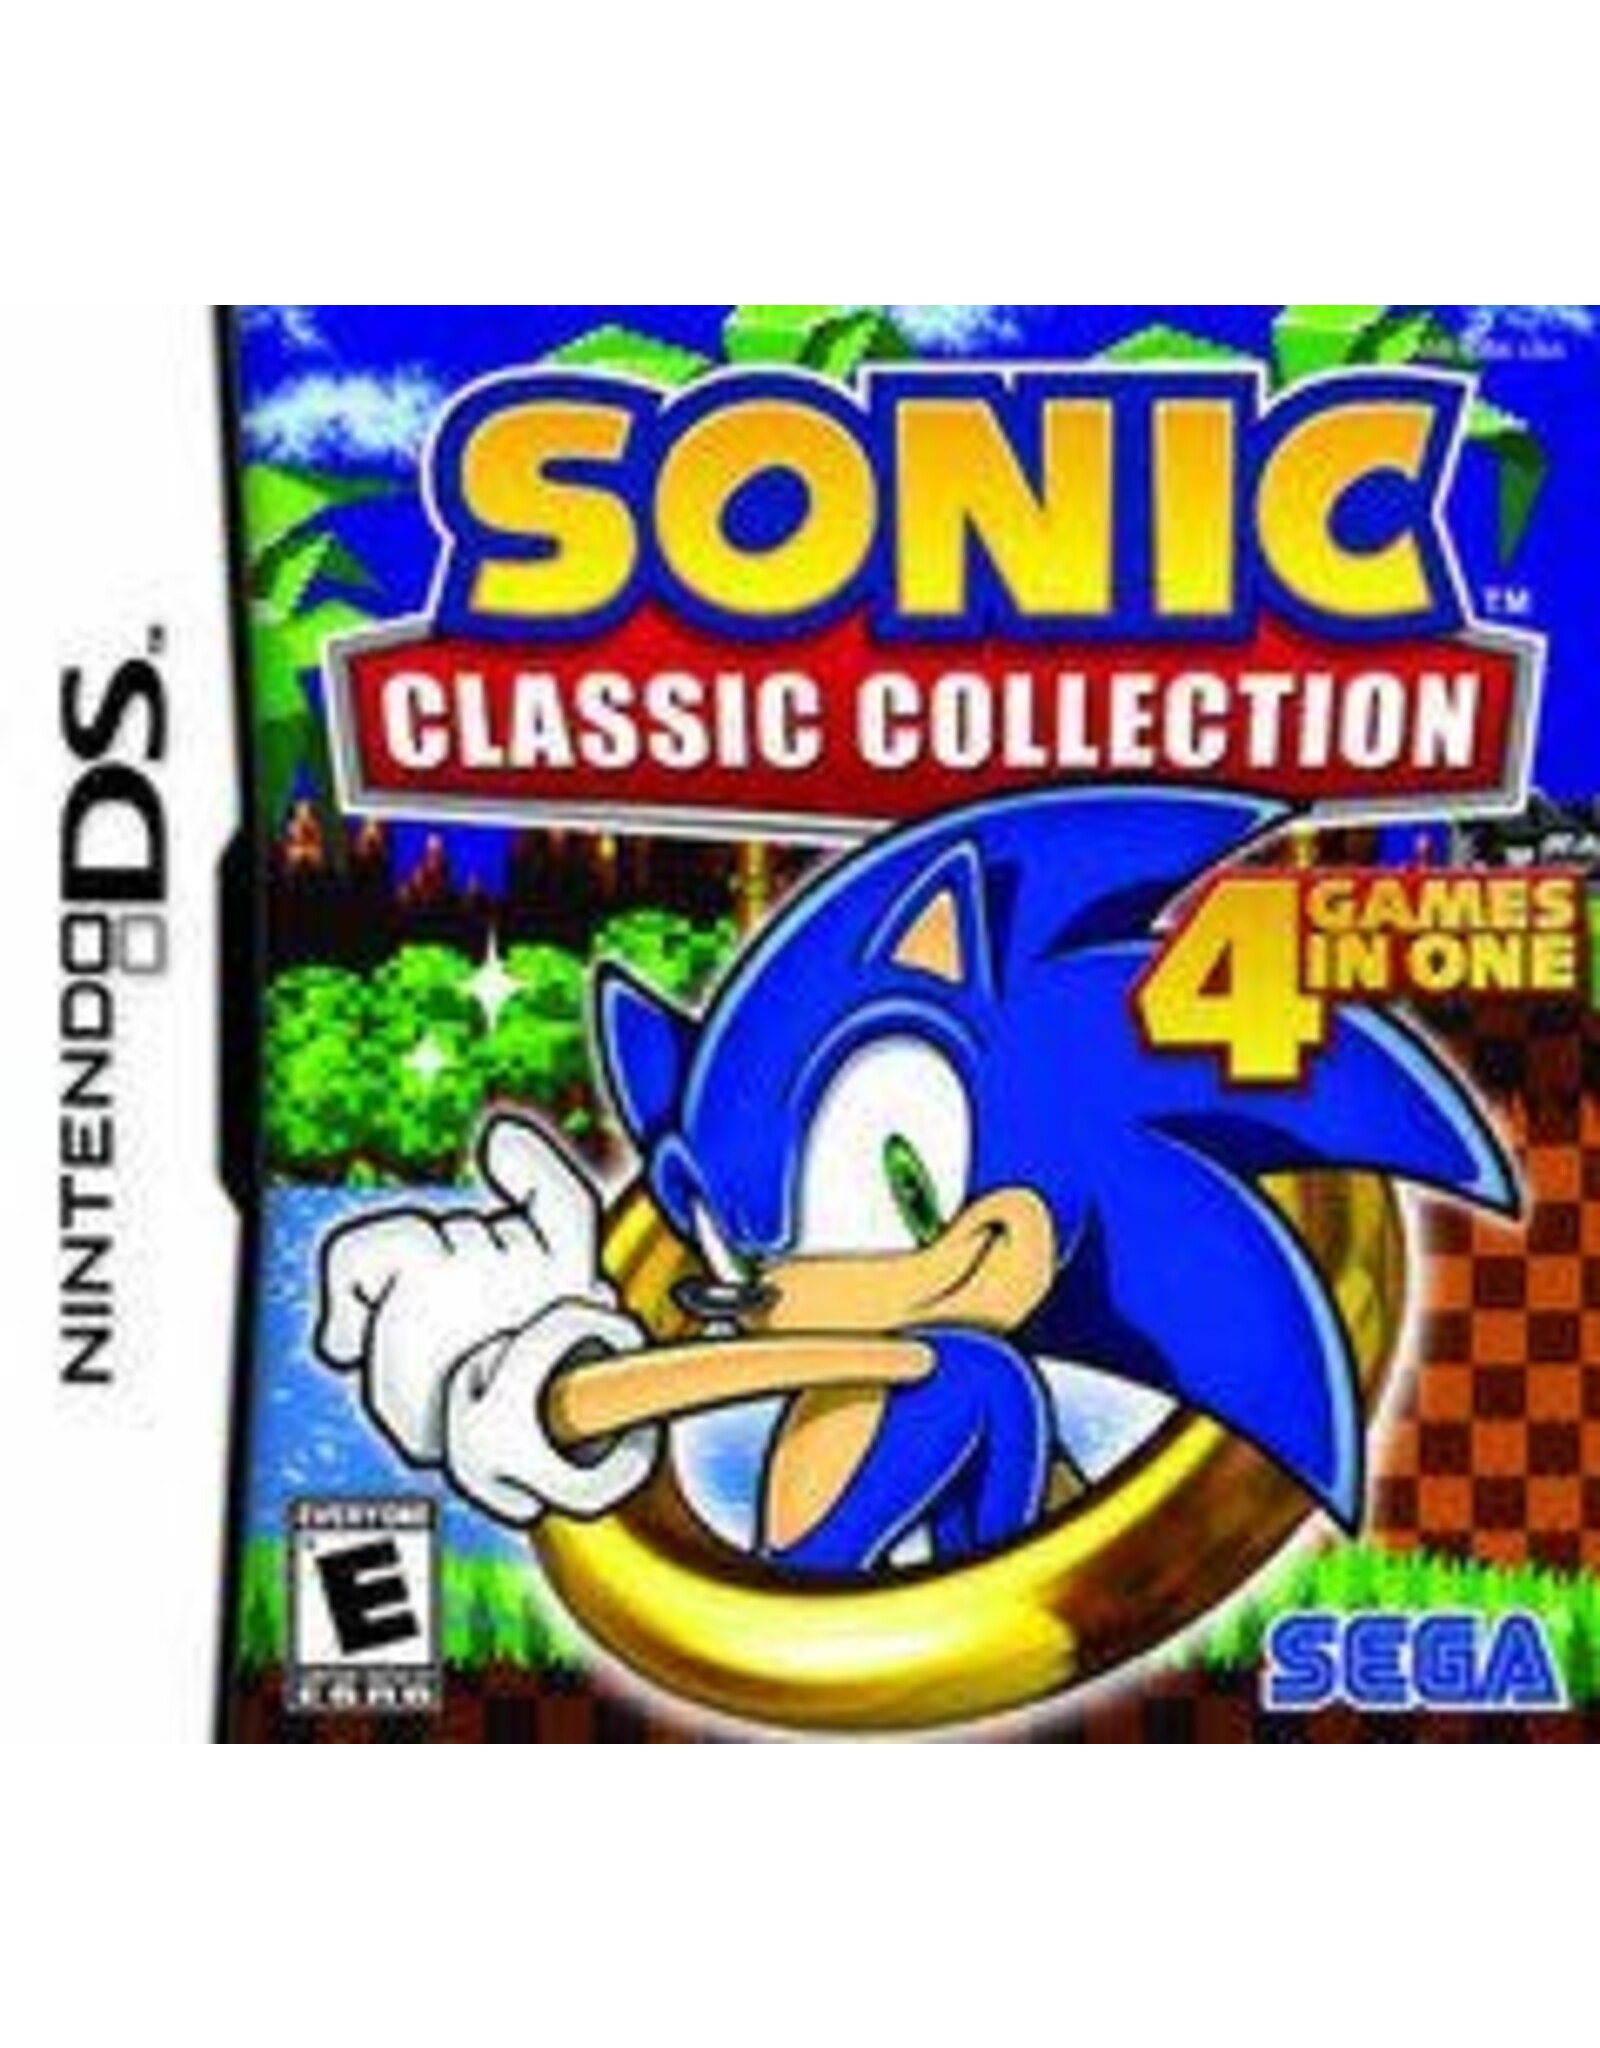 Nintendo DS Sonic Classic Collection (Brand New)